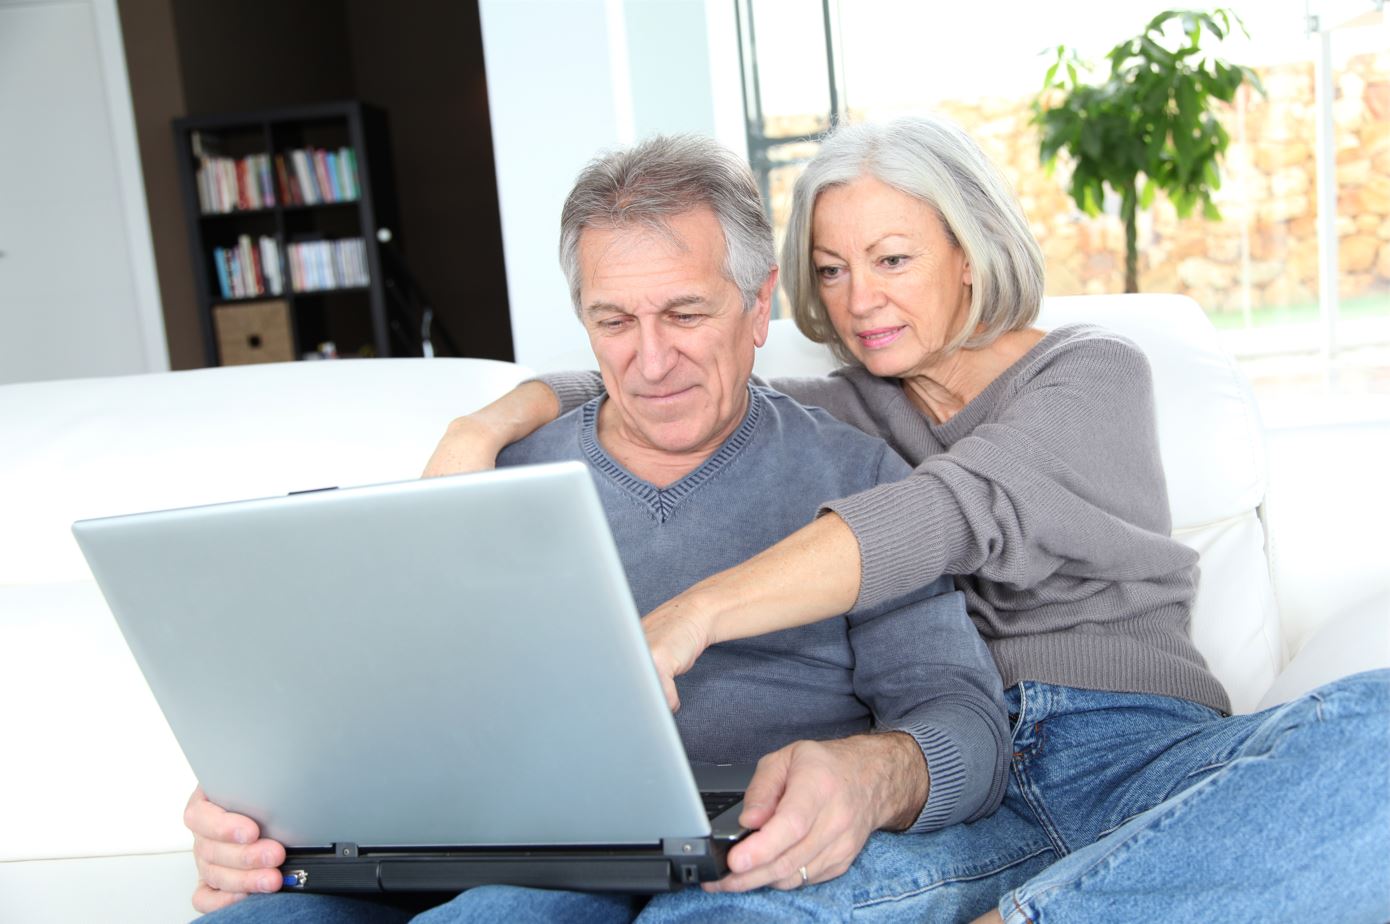 Senior couple surfing on internet at home